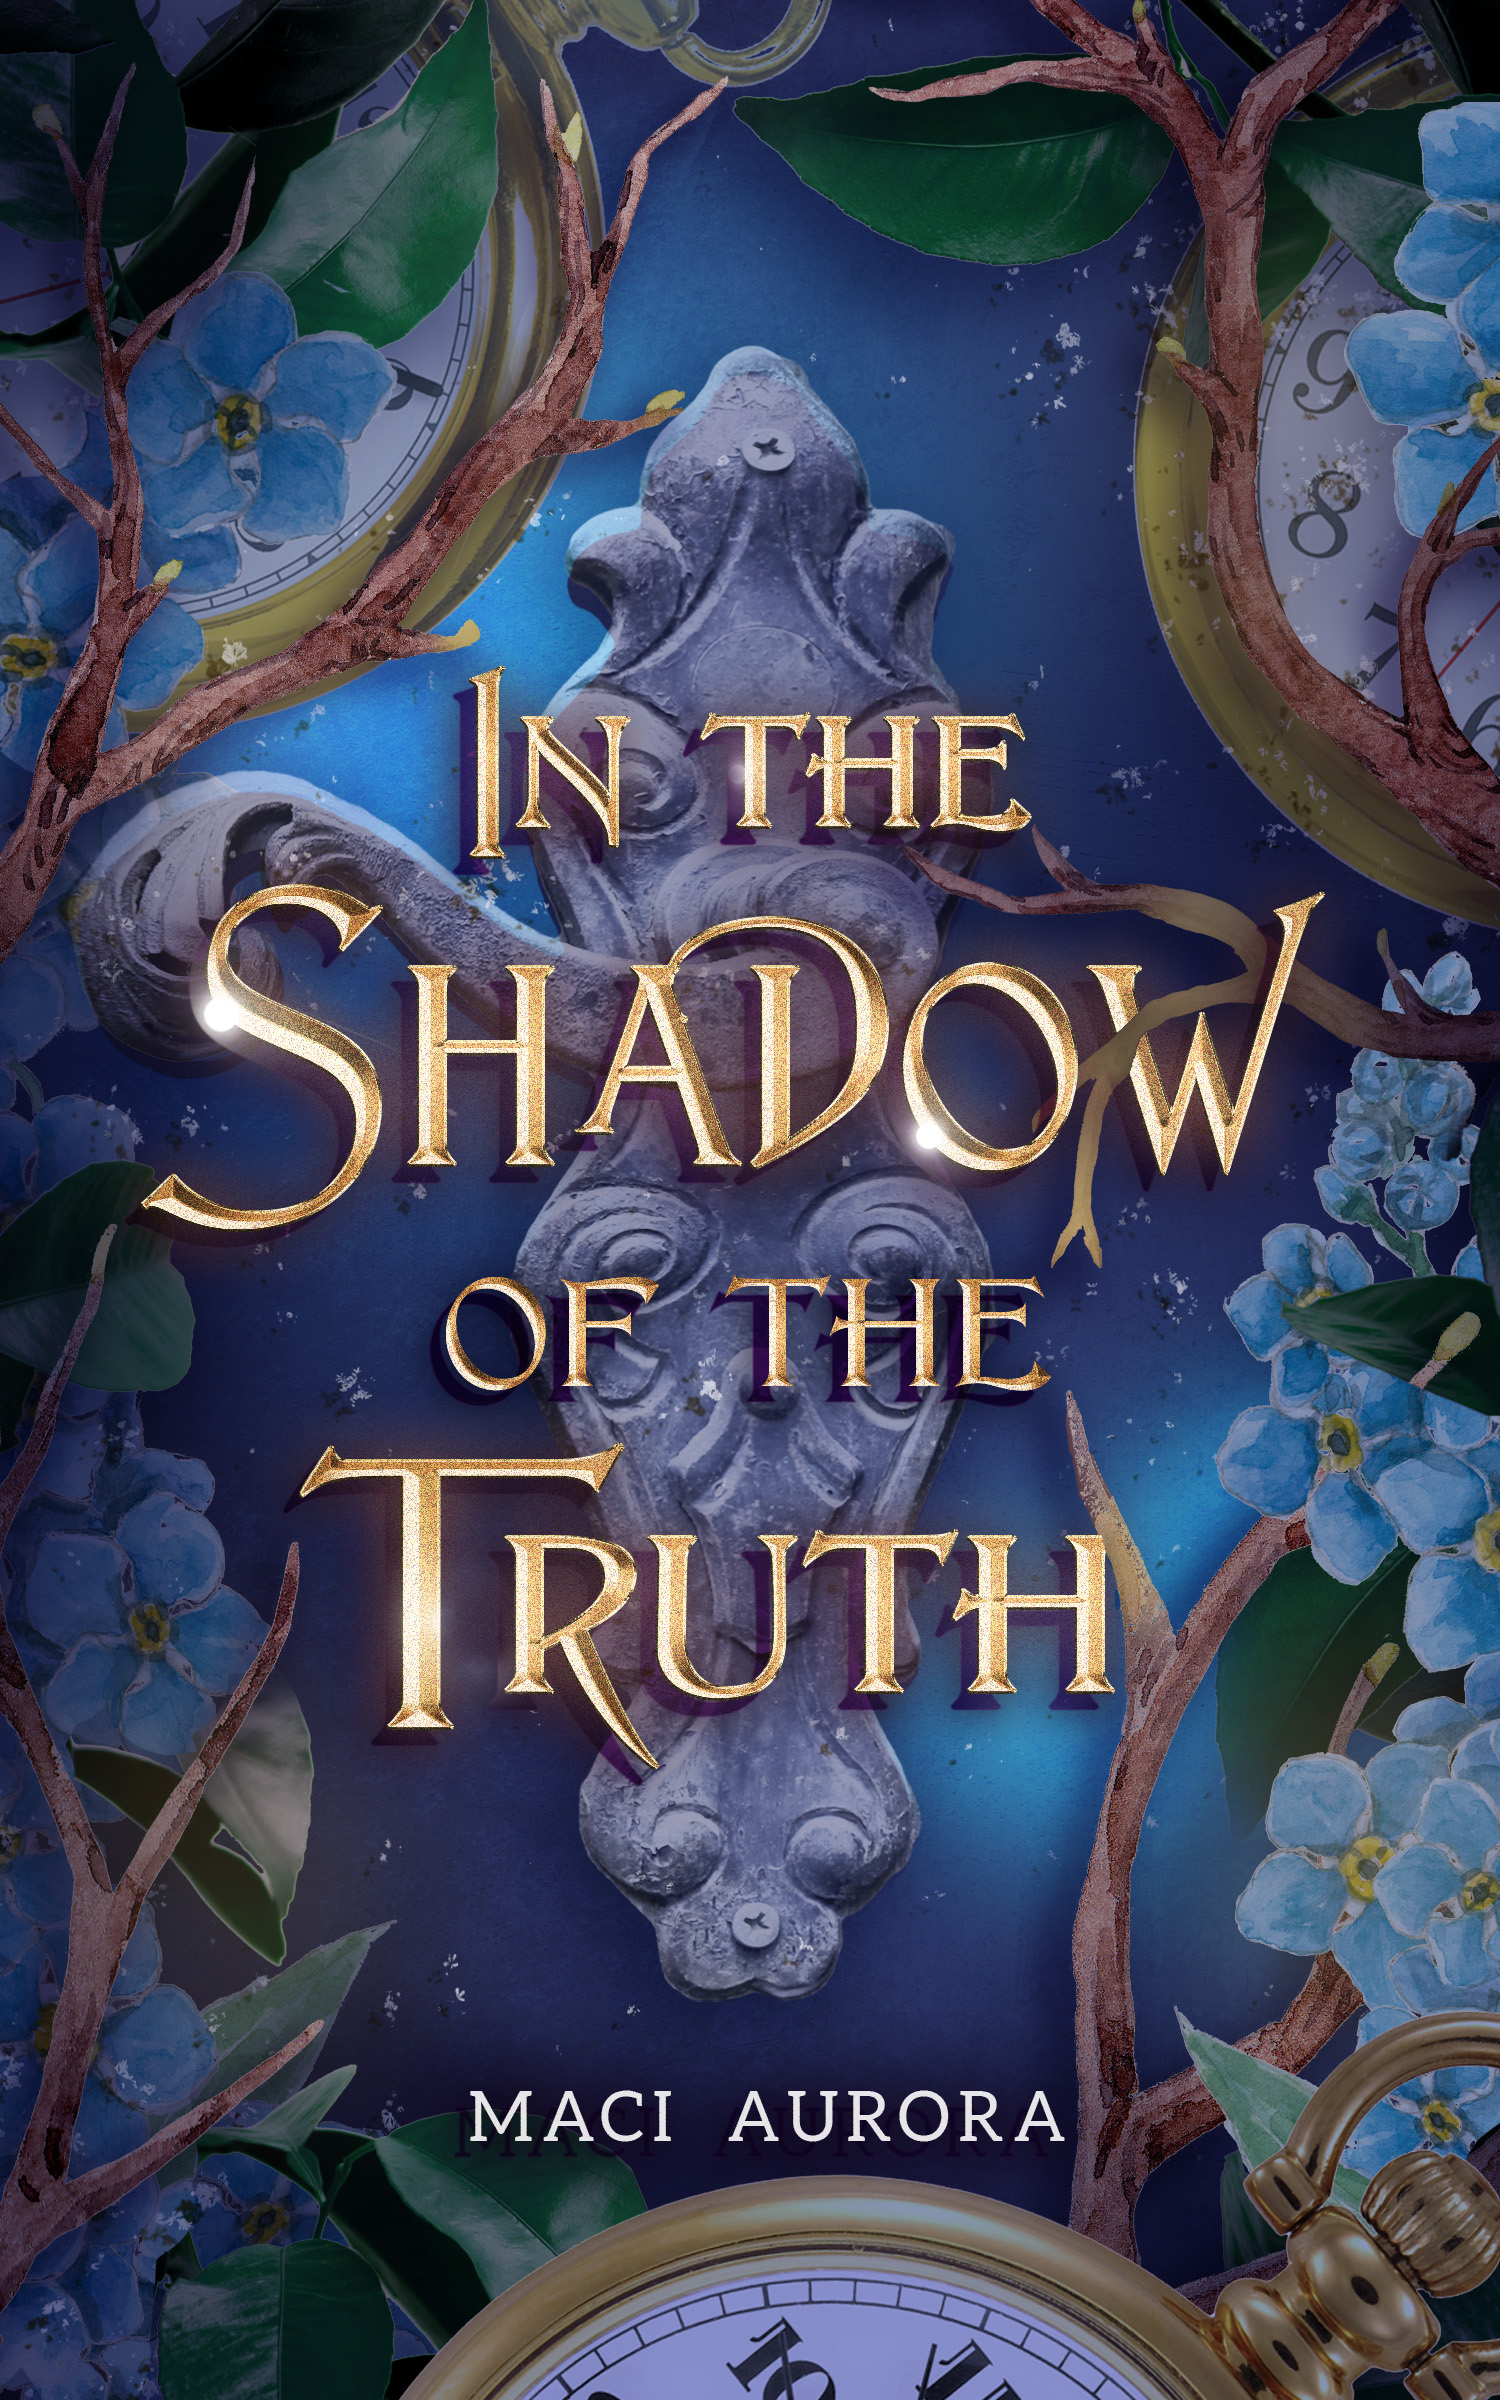 In the Shadow of Truth by Maci Aurora